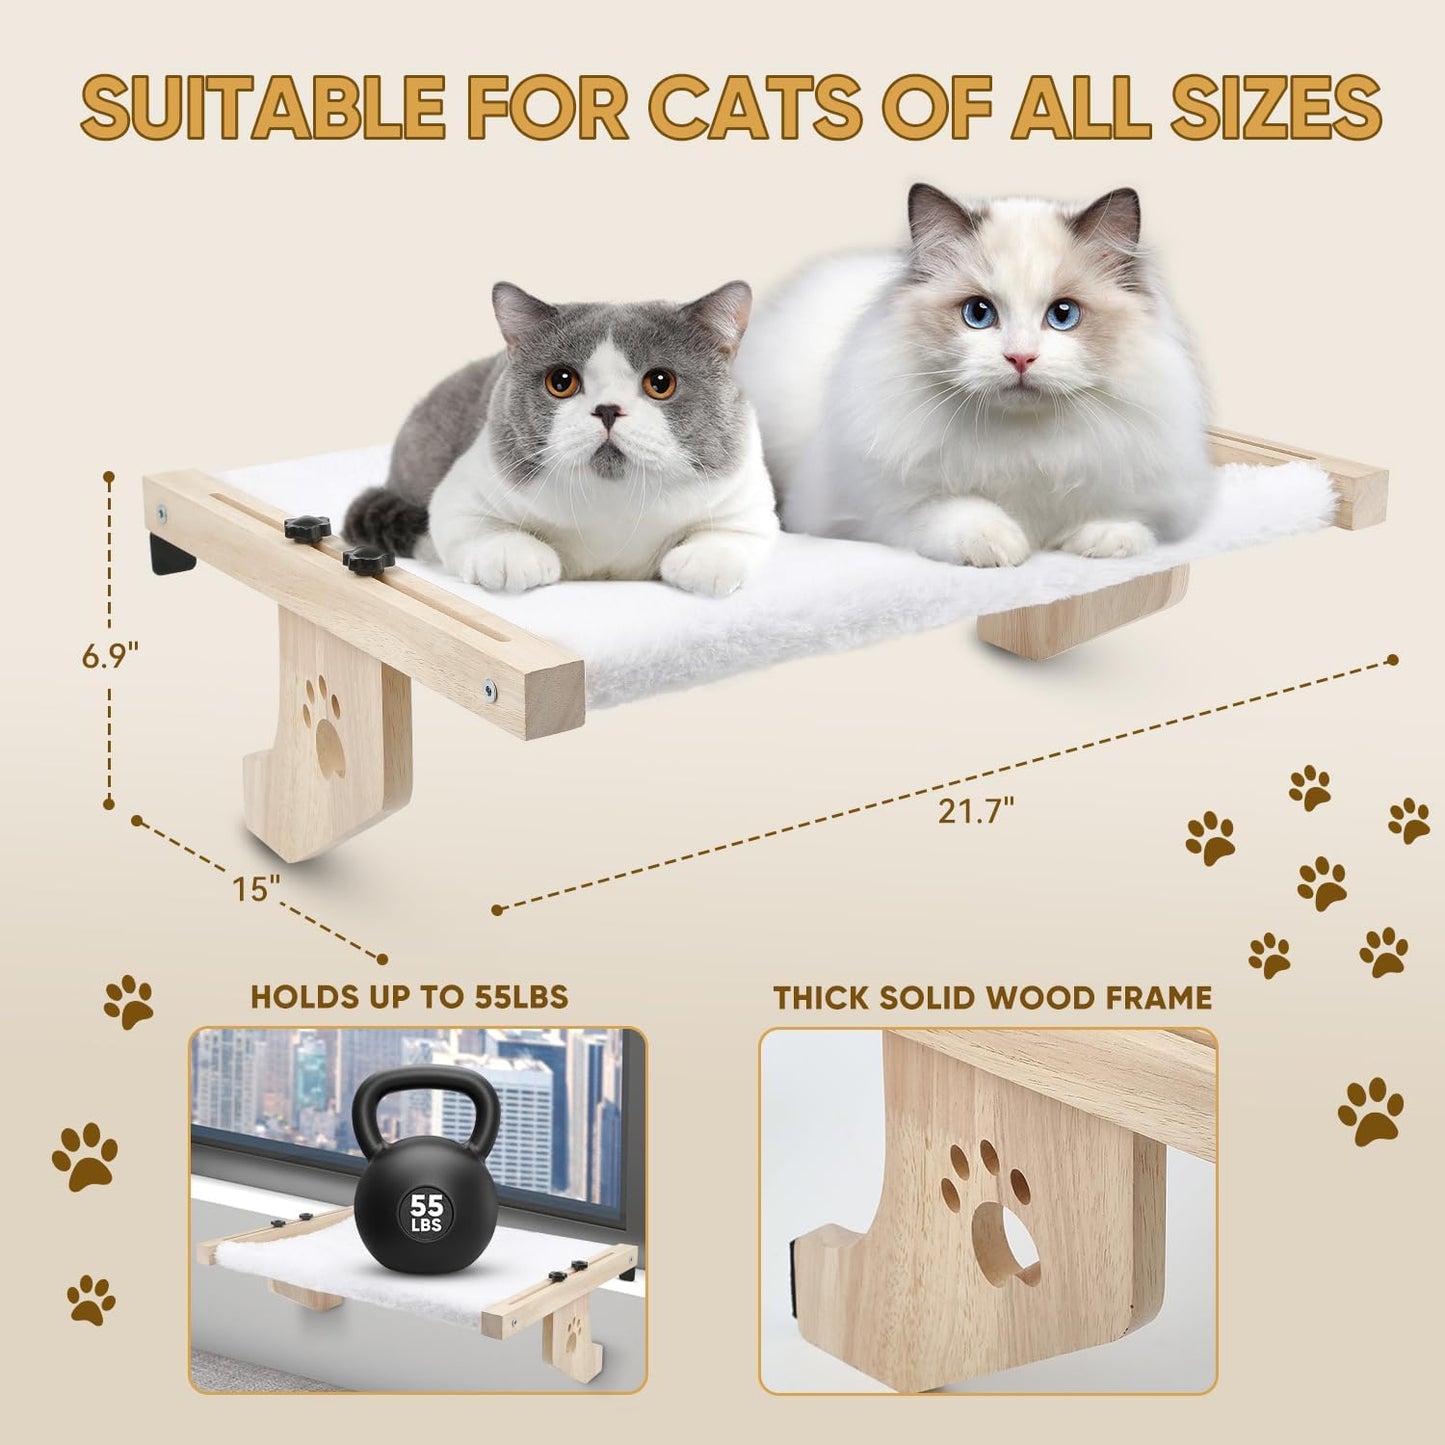 Cat Window Perch, Cat Window Hammock for Indoor Cats, Easy to Adjust & Assemble Large Cat Bed Seat for Windowsill, Bedside,Drawer and Cabinet